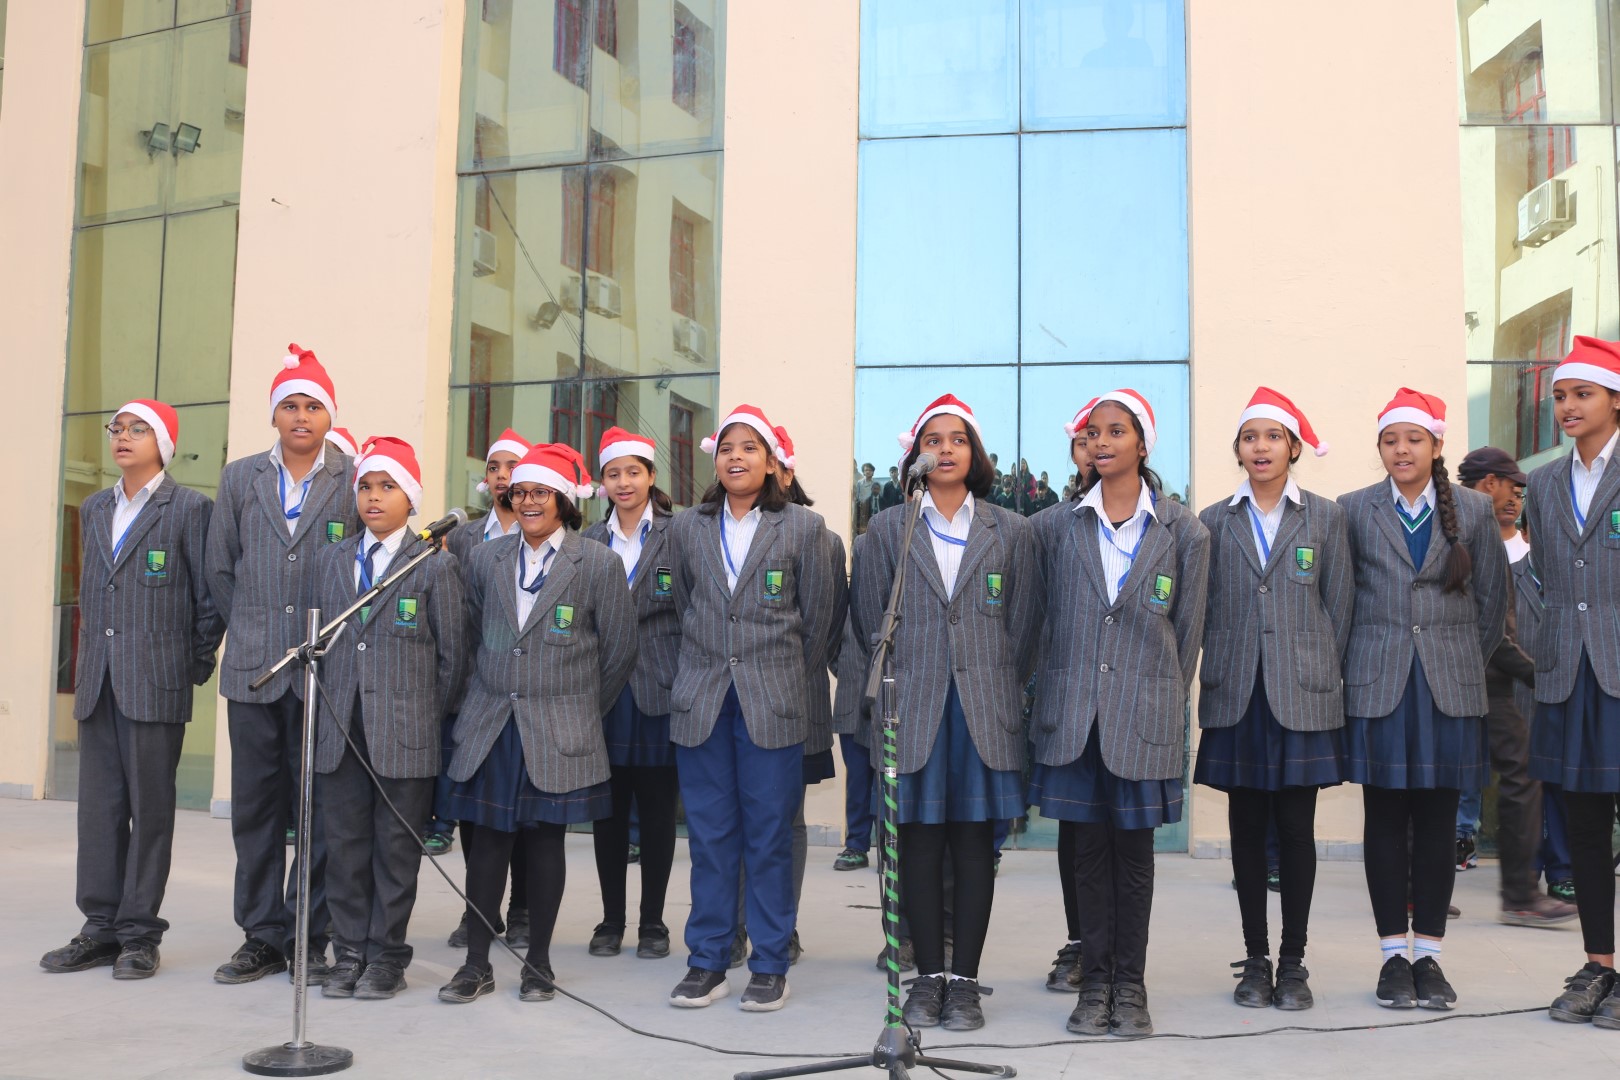 special assembly on Christmas